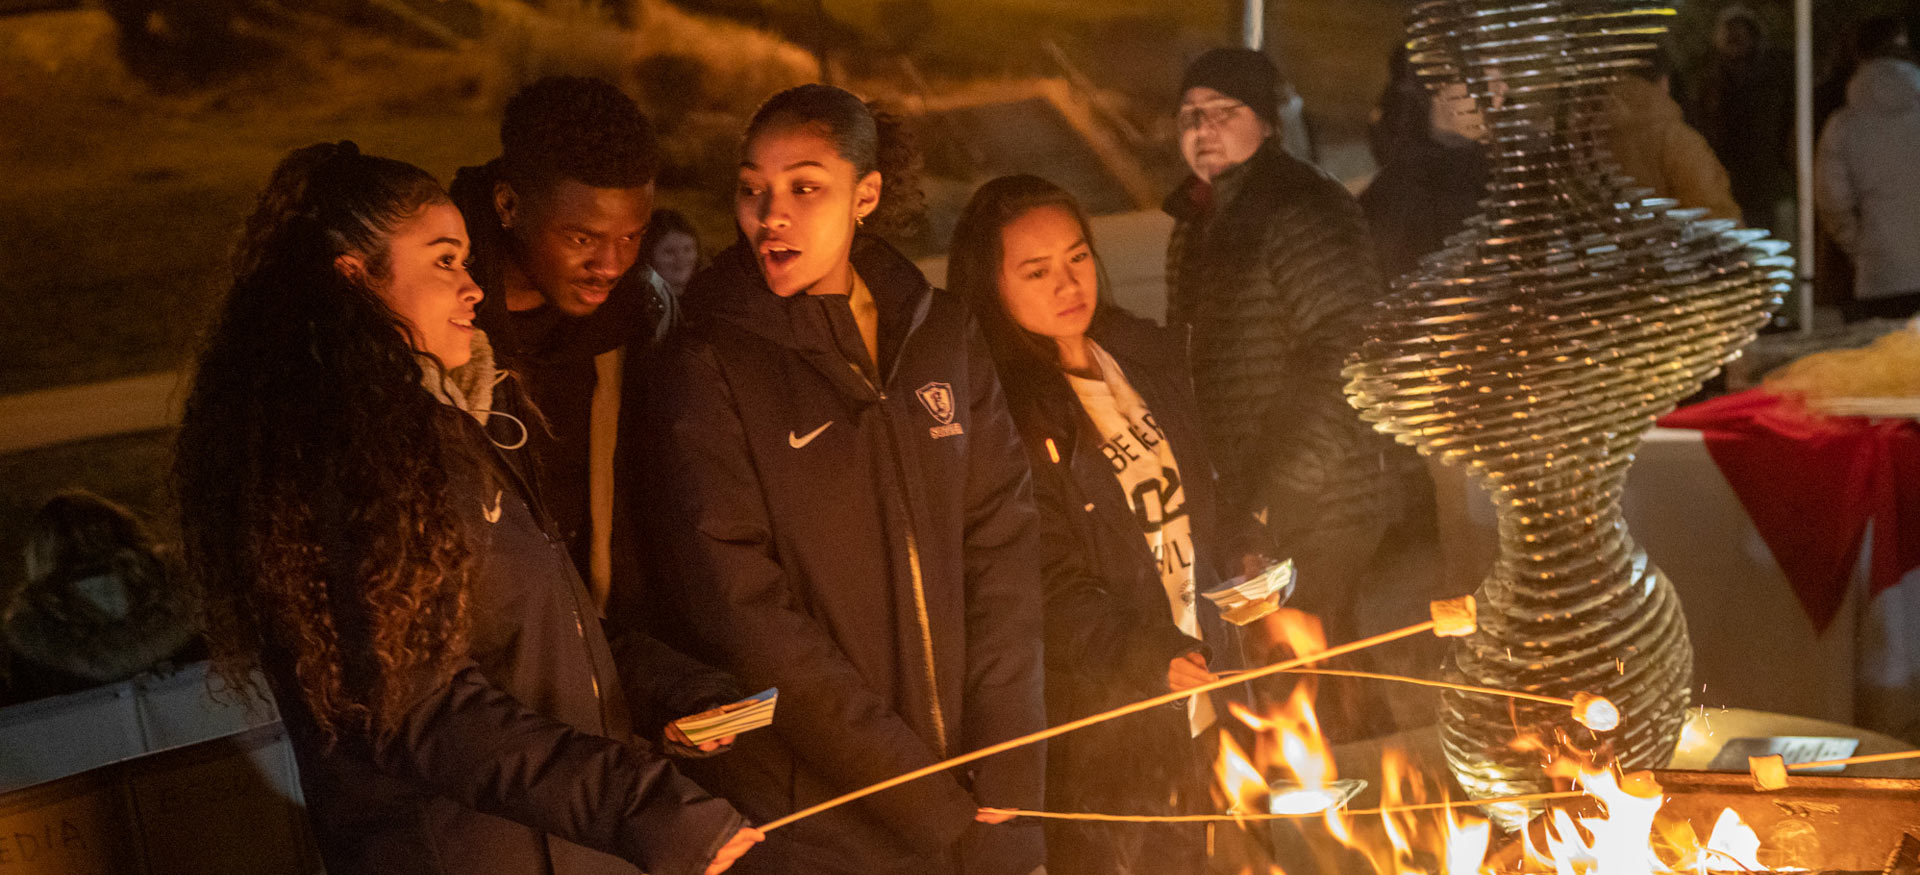 students roasting marshmallows over a fire at night